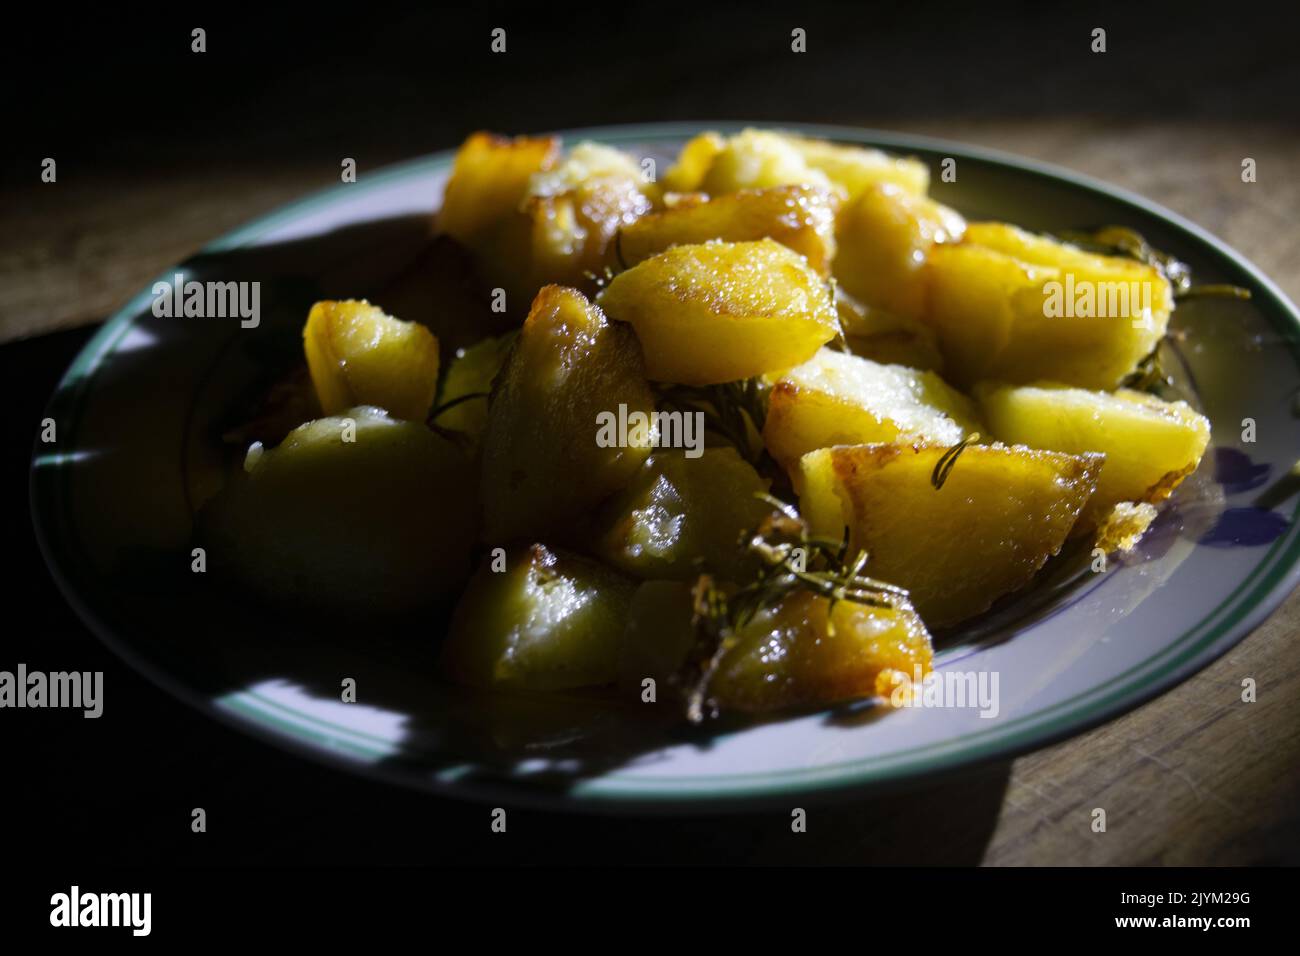 dish of baked potatoes with herbs and chiaroscuro light Stock Photo